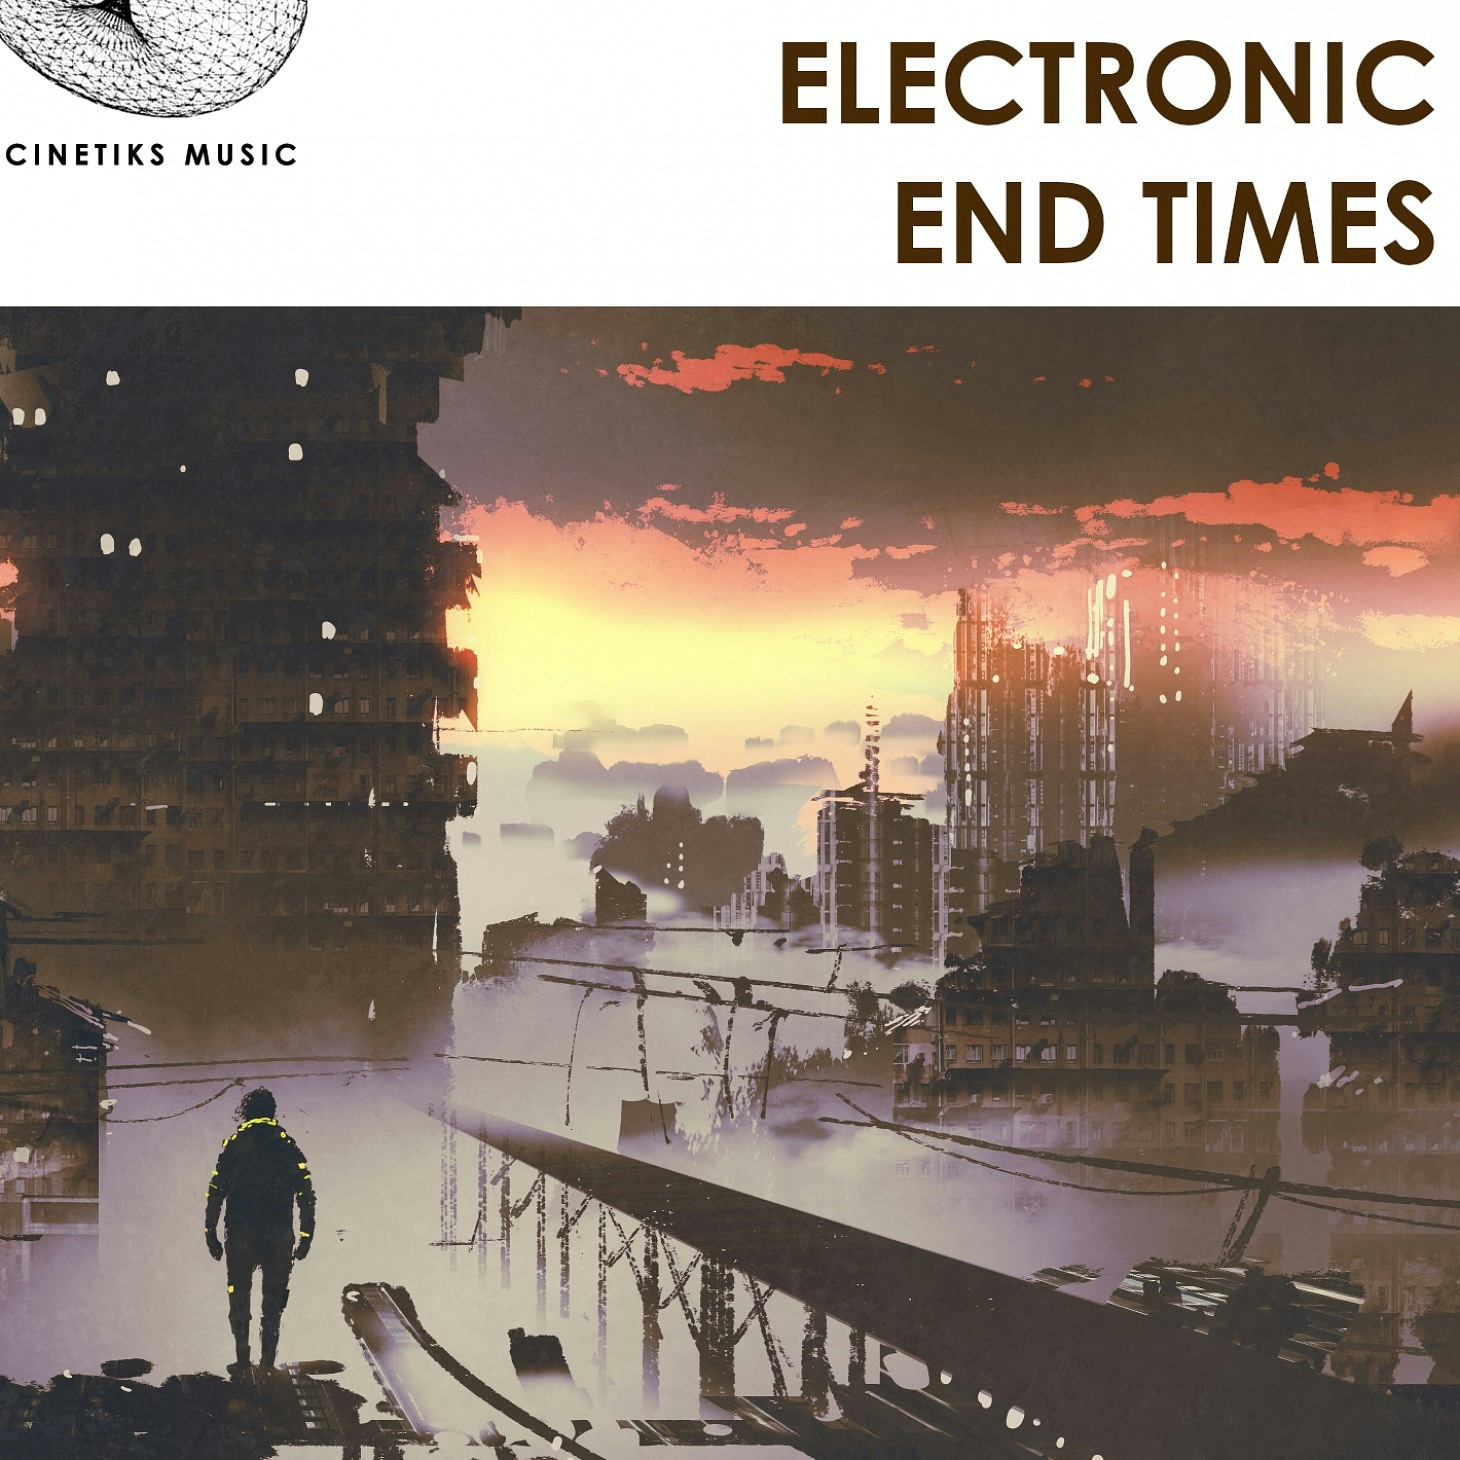  Electronic End Times